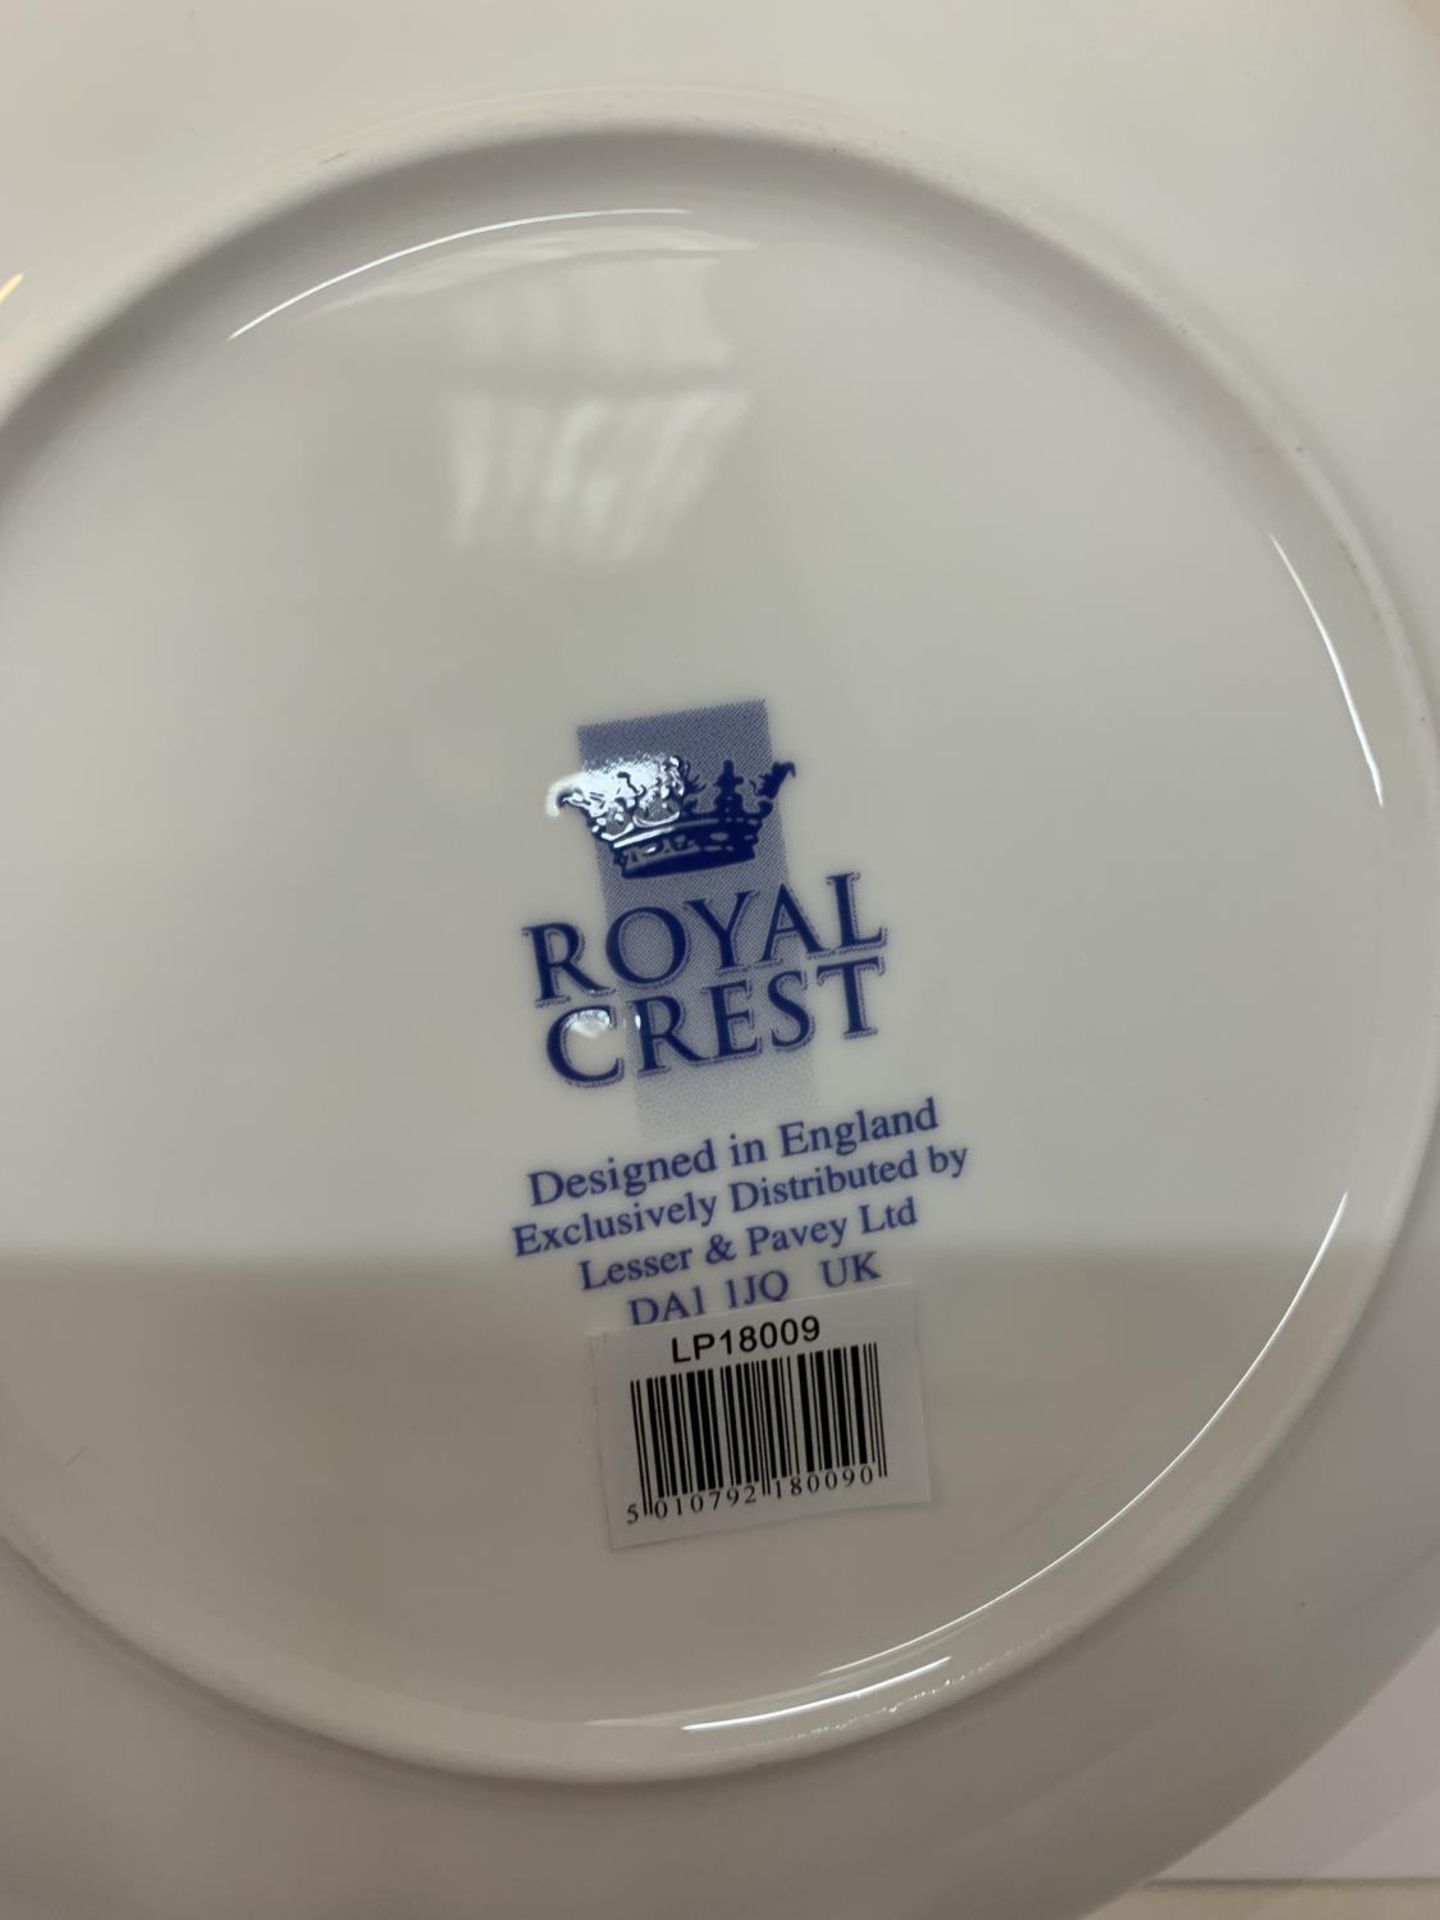 THREE ROYAL CREST COMMEMORATIVE ROYAL WEDDING 8" PLATES IN BOXES - Image 3 of 3